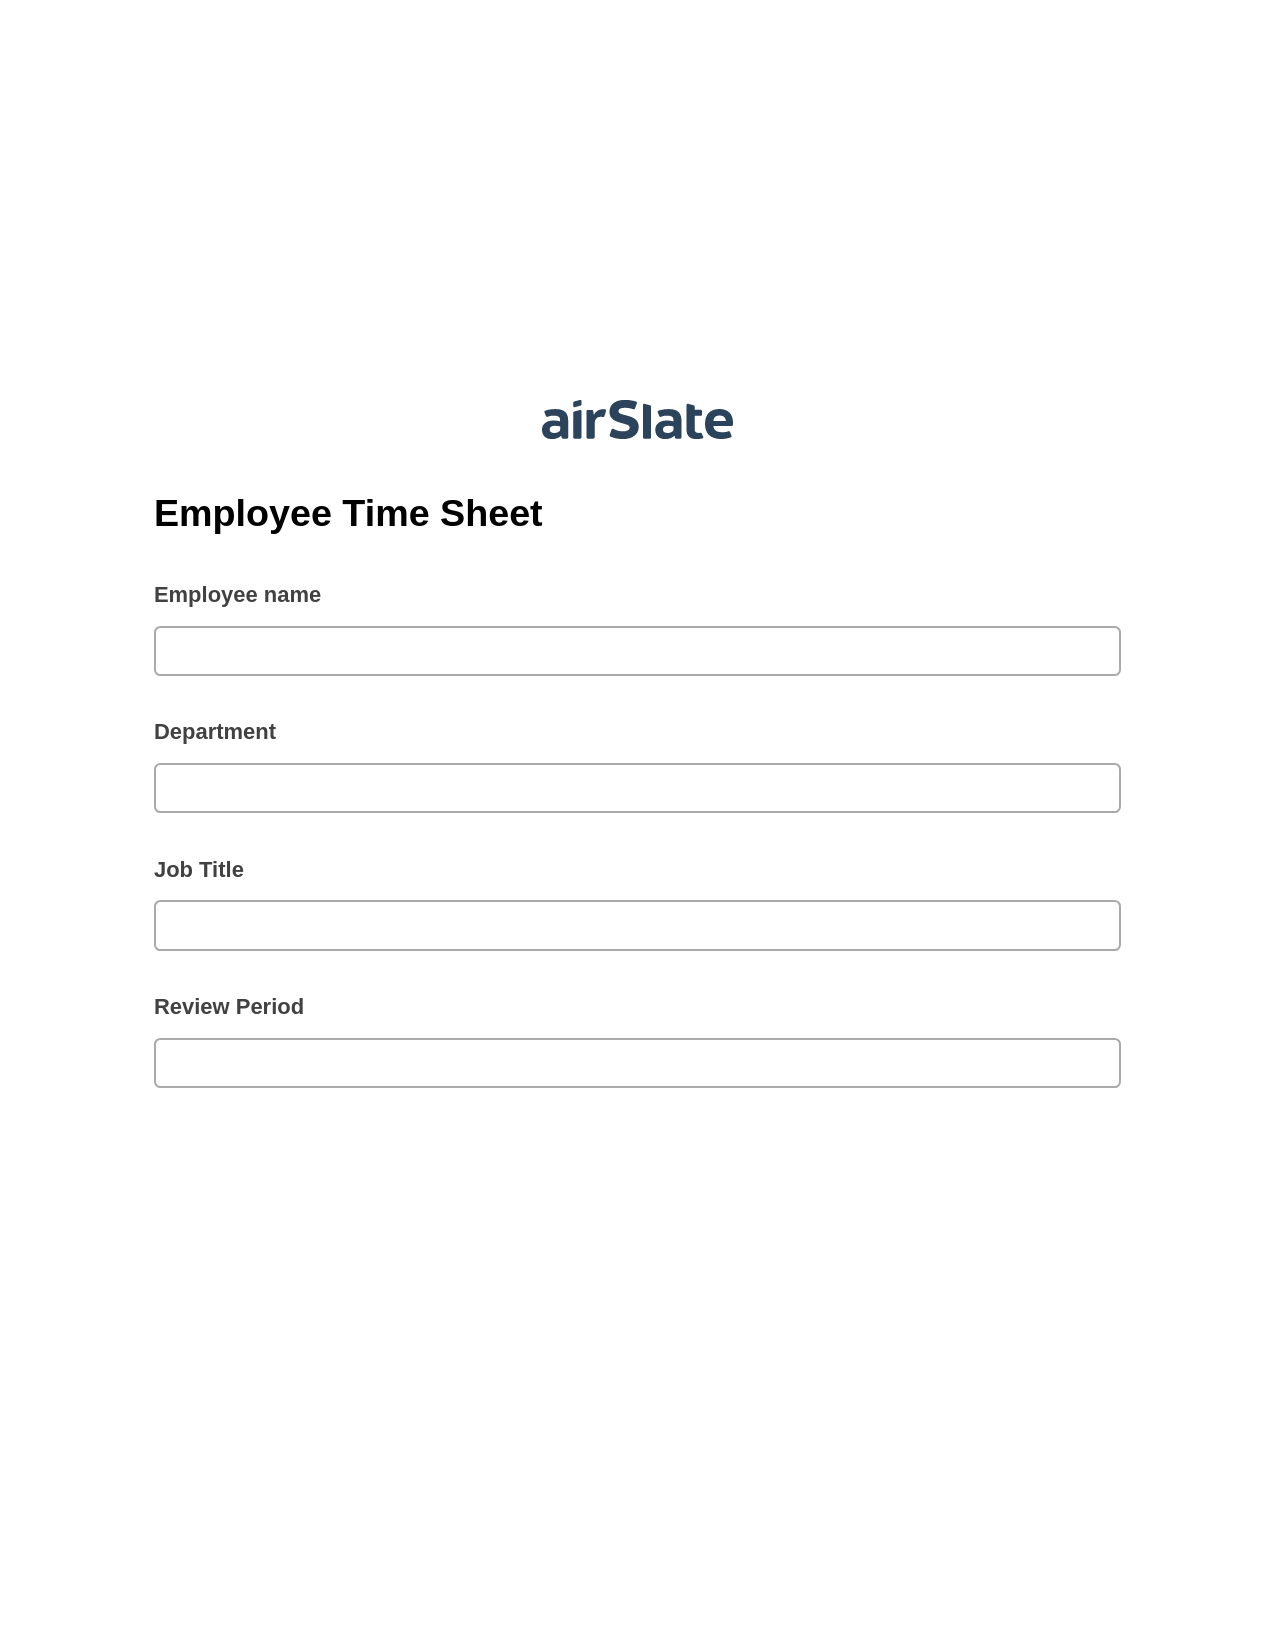 Multirole Employee Time Sheet Prefill from NetSuite records, Update Audit Trail Bot, Export to Google Sheet Bot